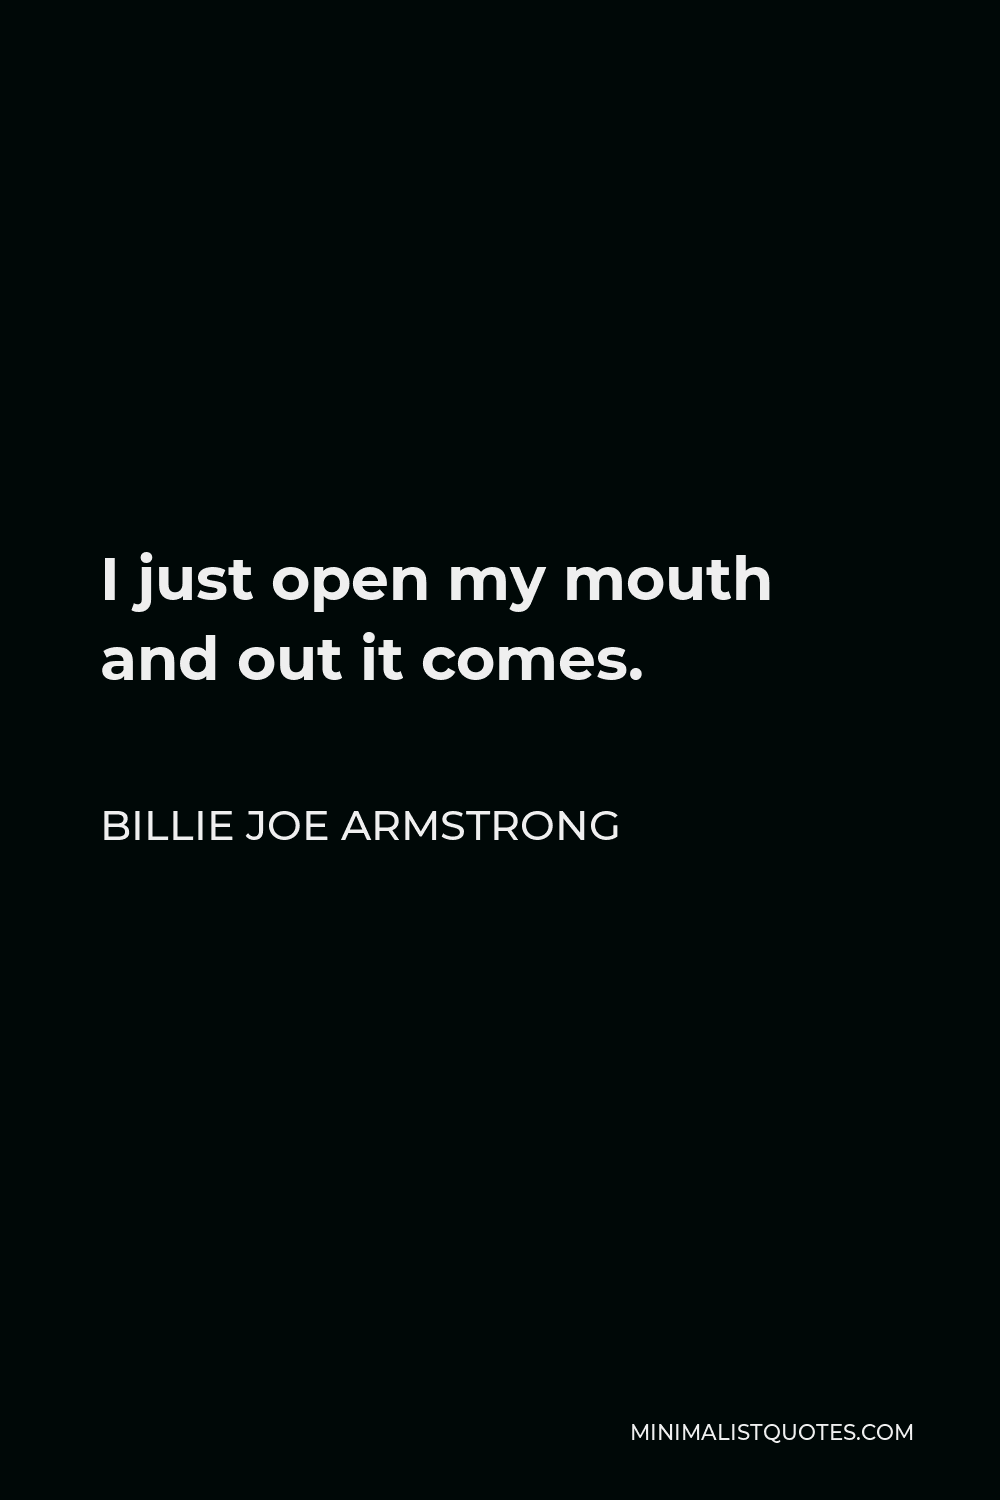 Billie Joe Armstrong Quote - I just open my mouth and out it comes.